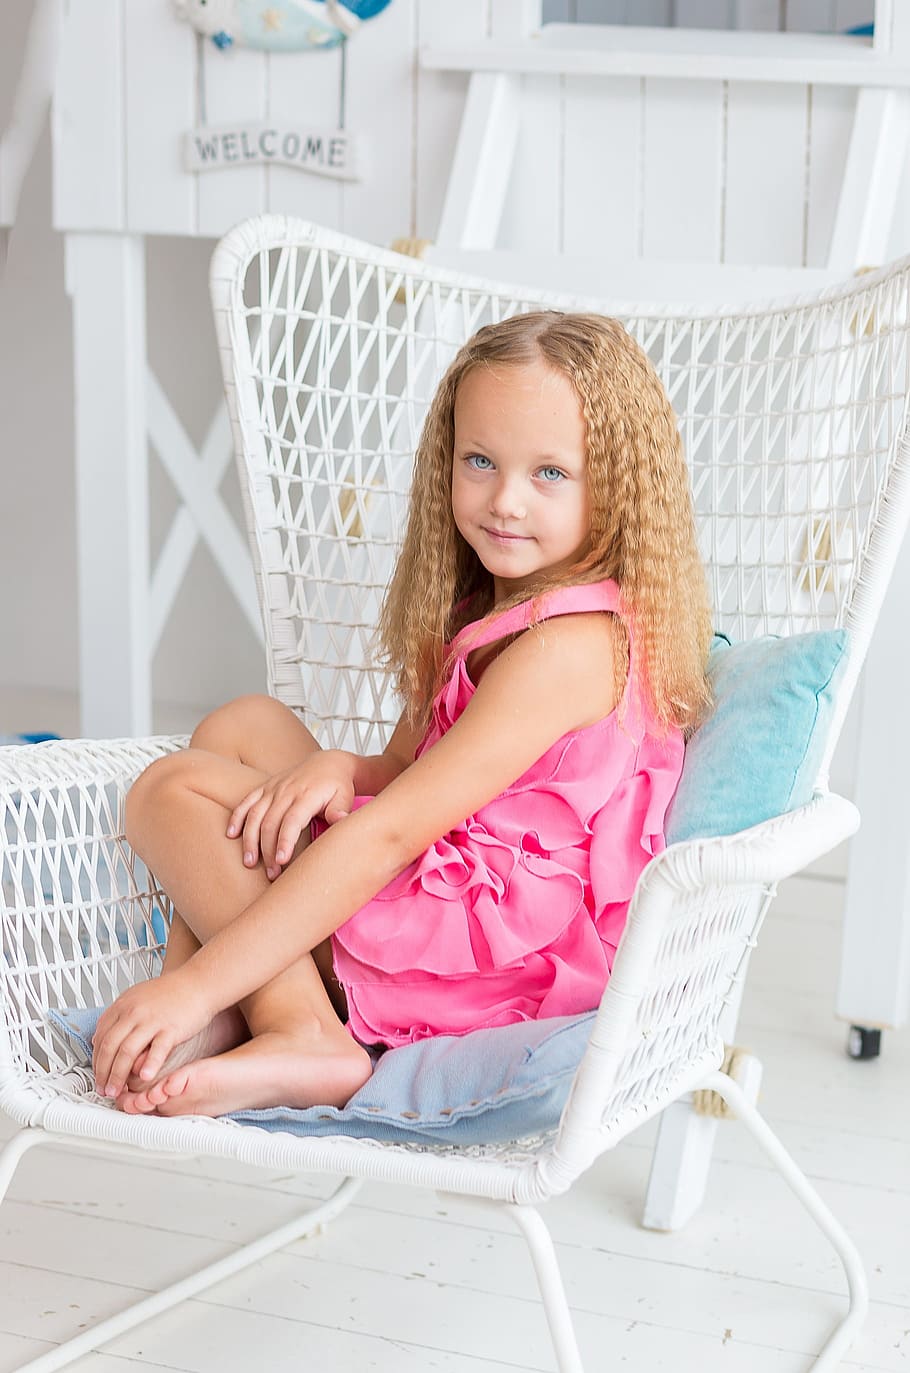 girl, pink, sleeveless dress, sitting, white, wicker armchair, young, blue eyes, eyes, look